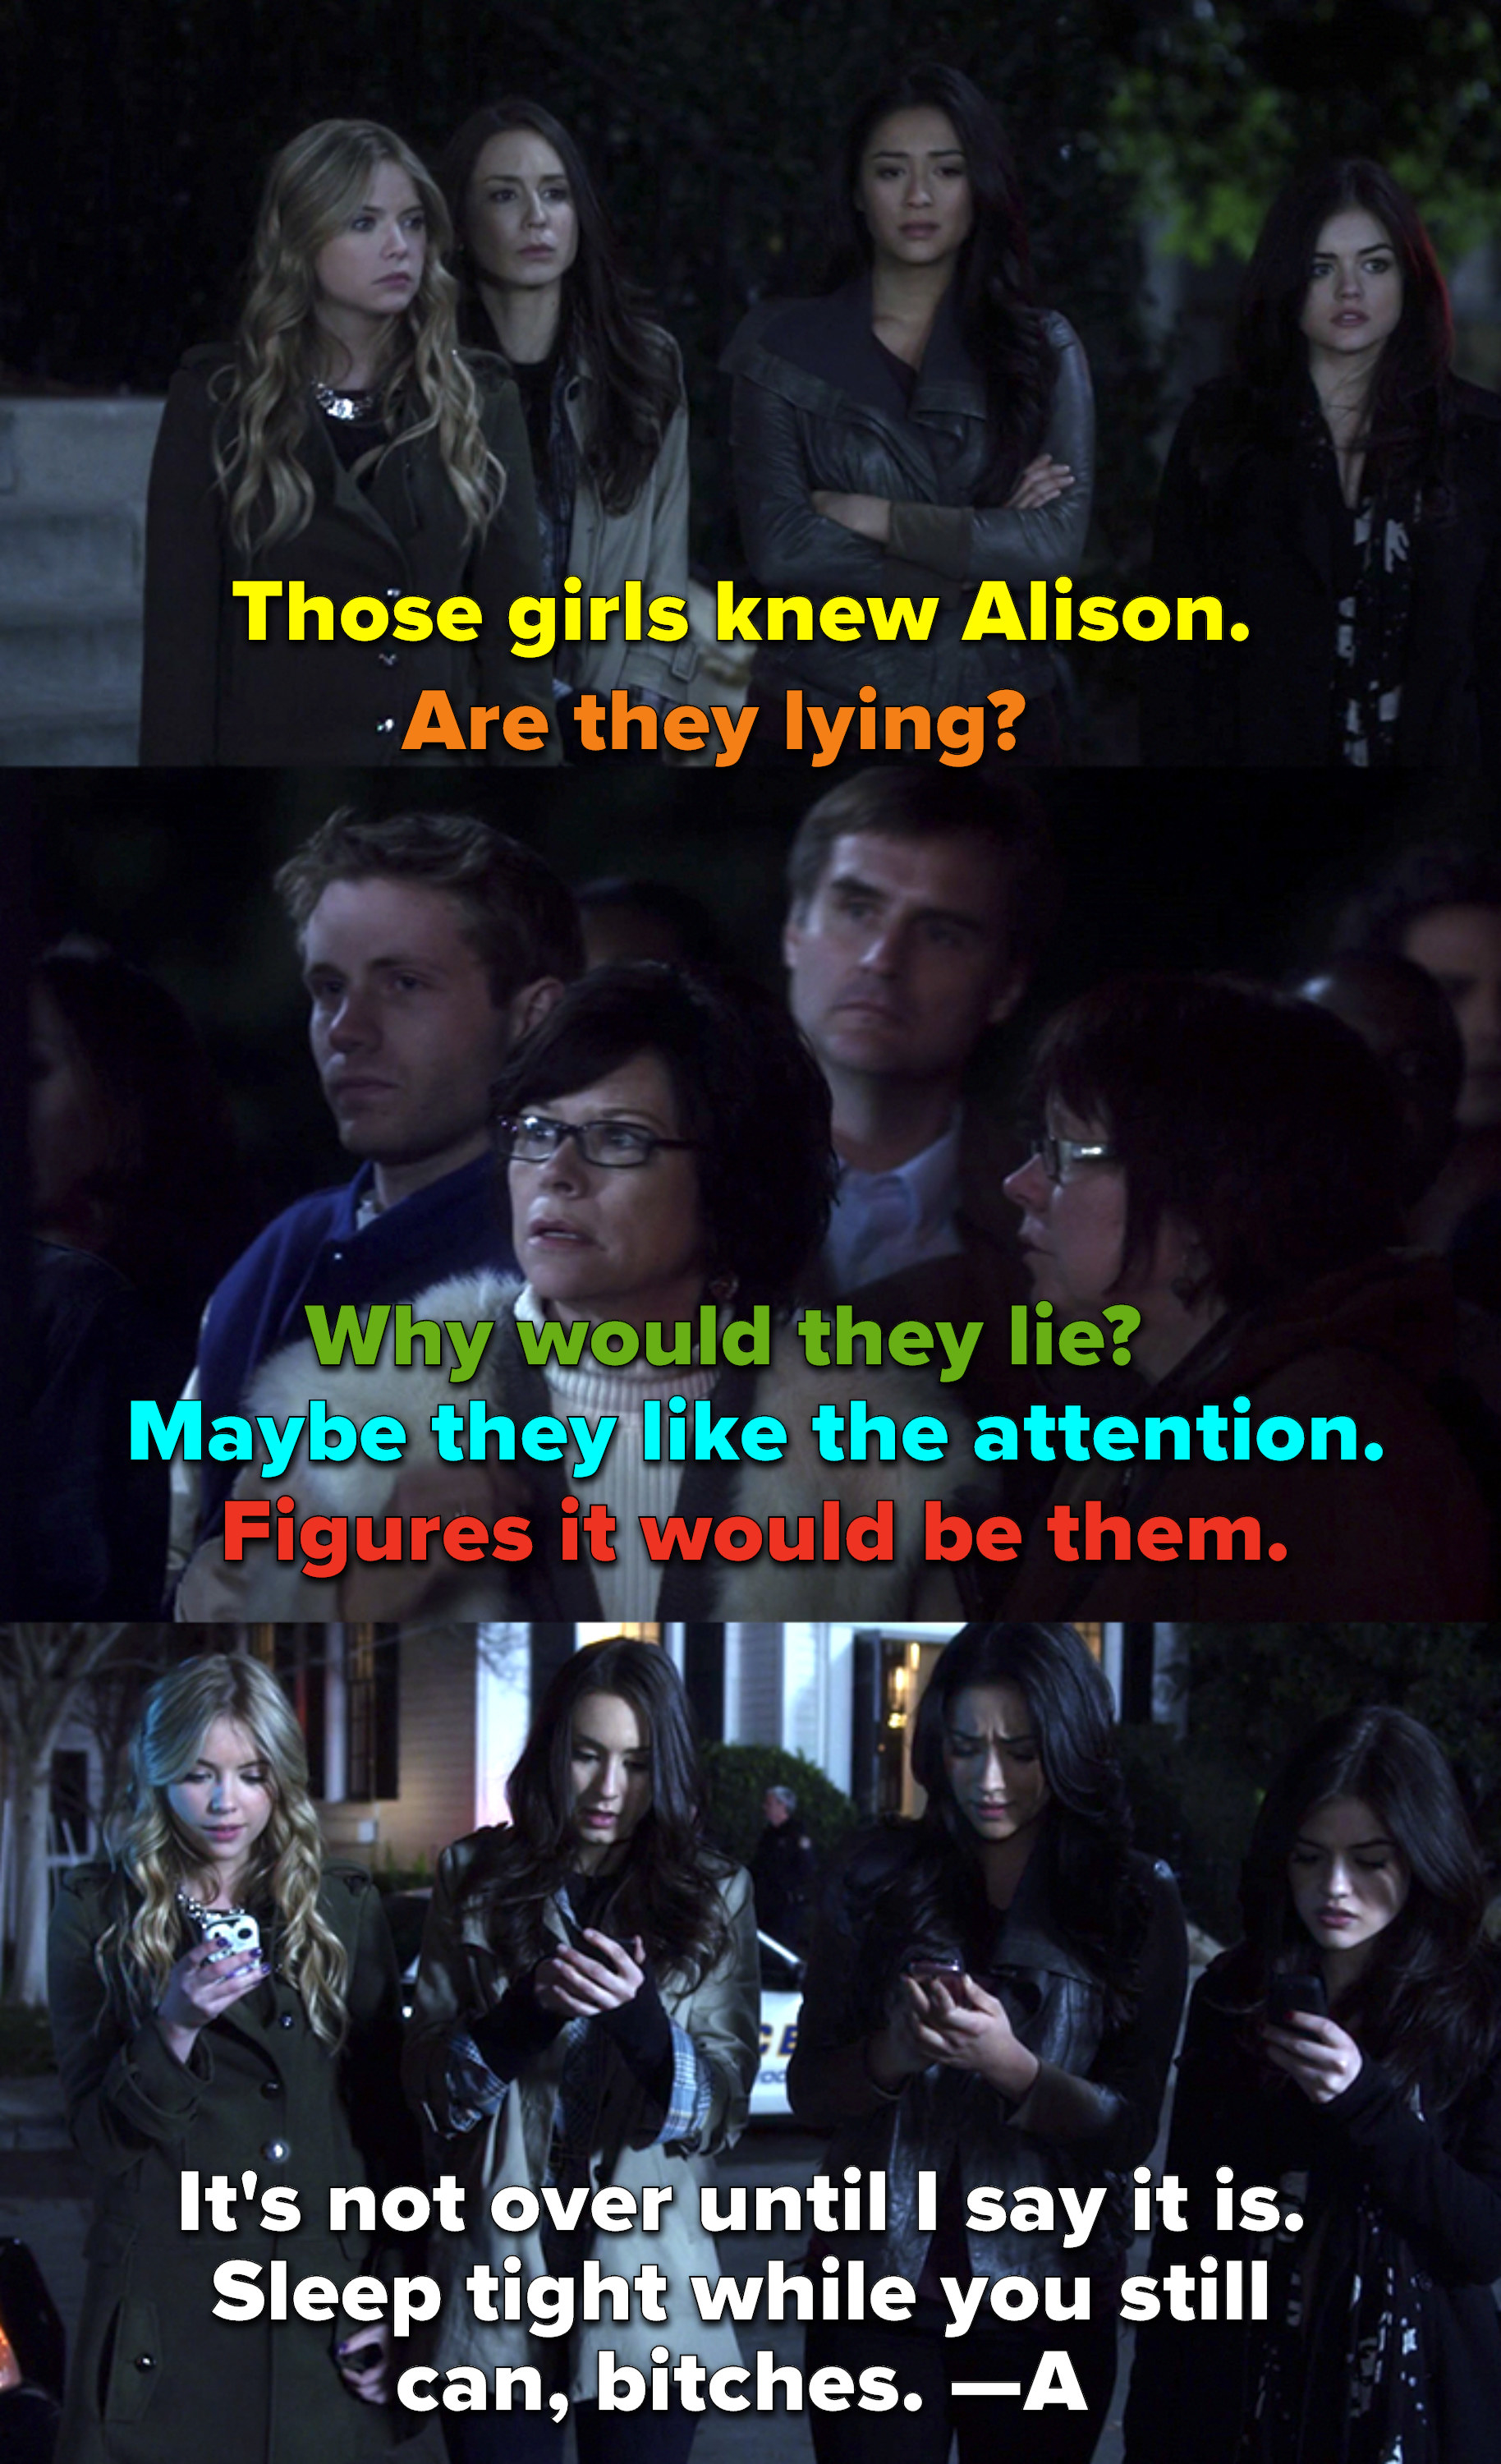 people gossiping saying the girls knew Alison and are lying, and then the girls receiving a message from A that says, &quot;It&#x27;s not over until I say it is. Sleep tight while you still can, bitches&quot;